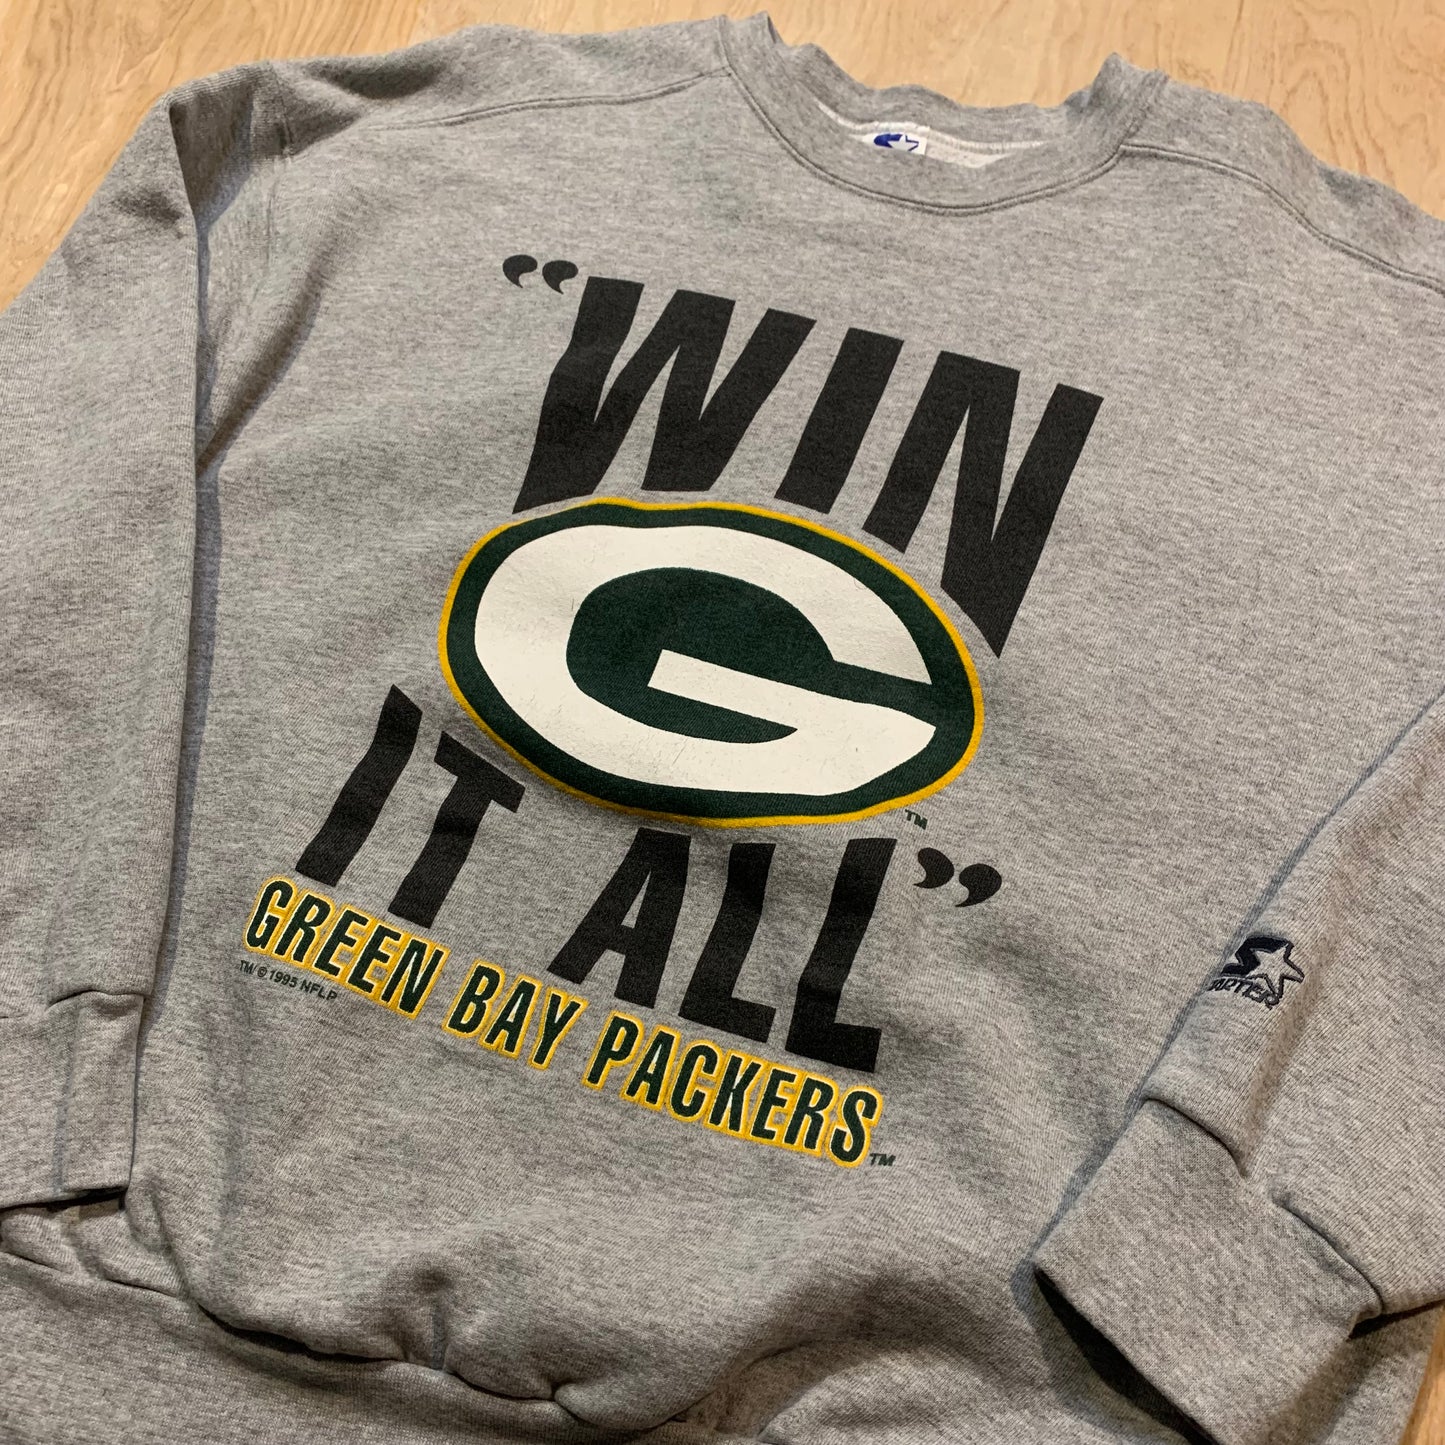 1995 "Win It All" Green Bay Packers Crewneck